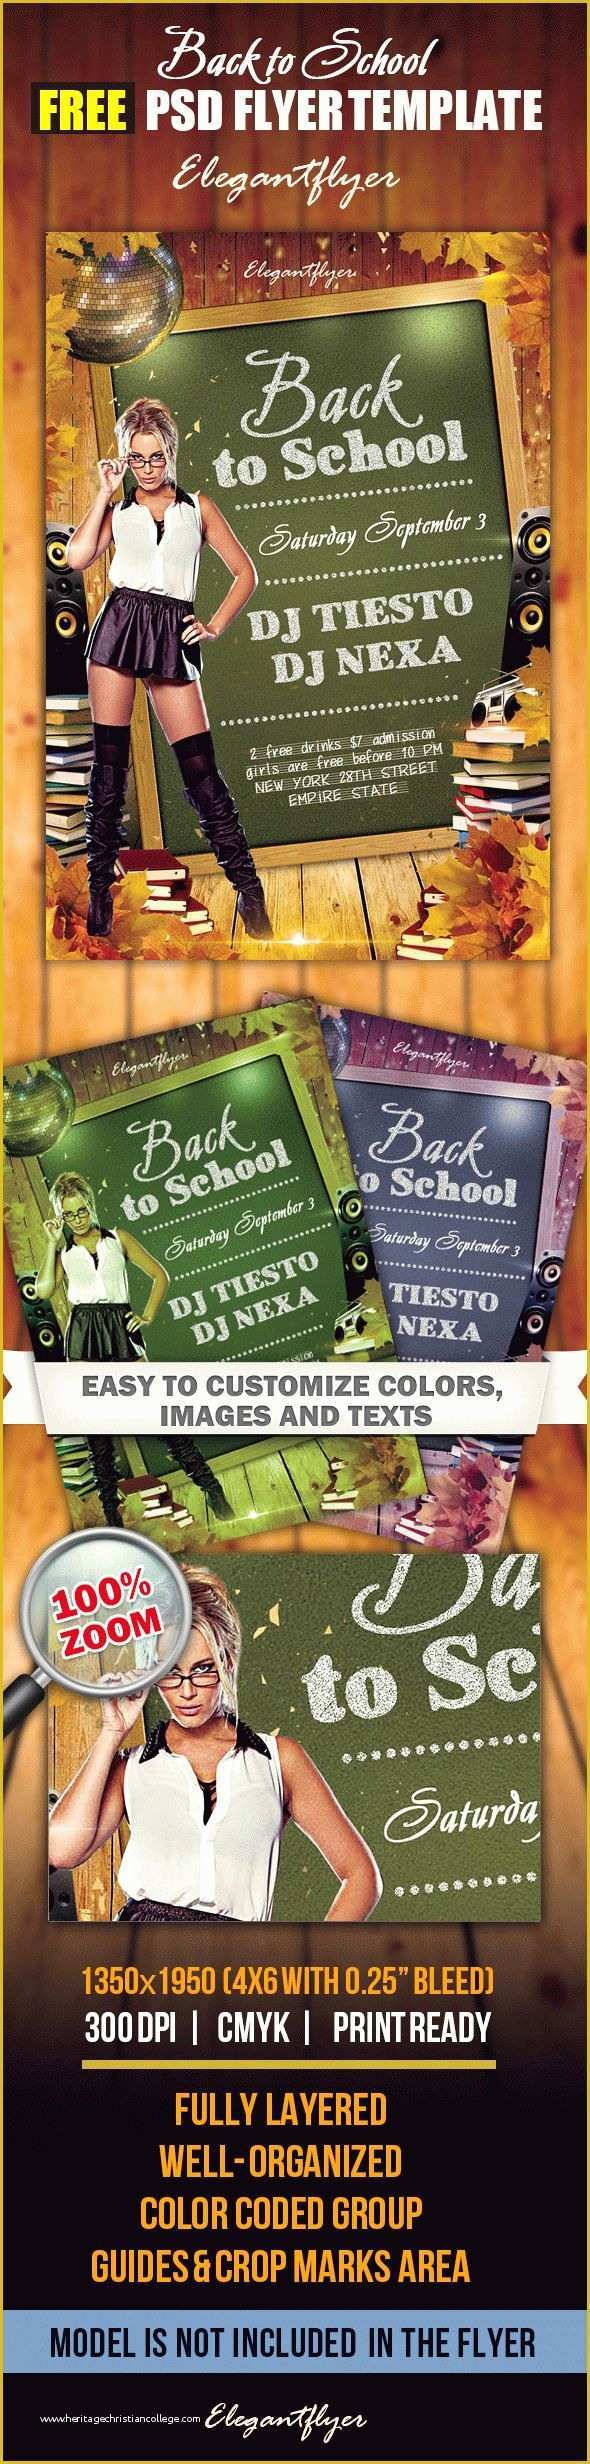 Free Back to School Flyer Template Of Back to School – Free Flyer Psd Template – by Elegantflyer